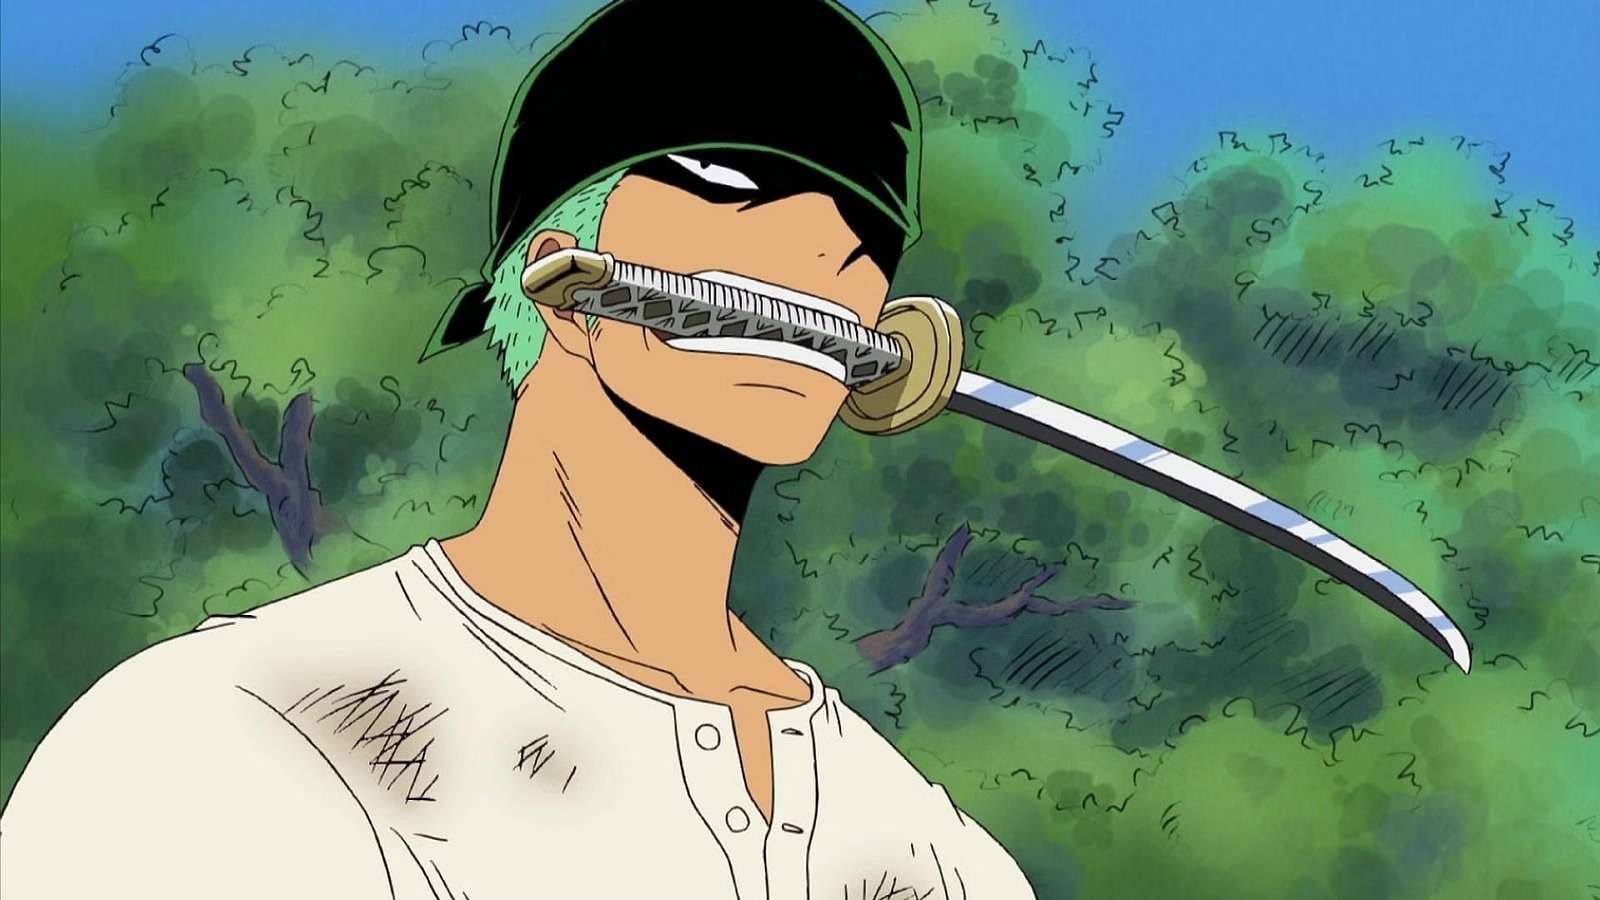 An image of pre-time skip Zoro from One Piece